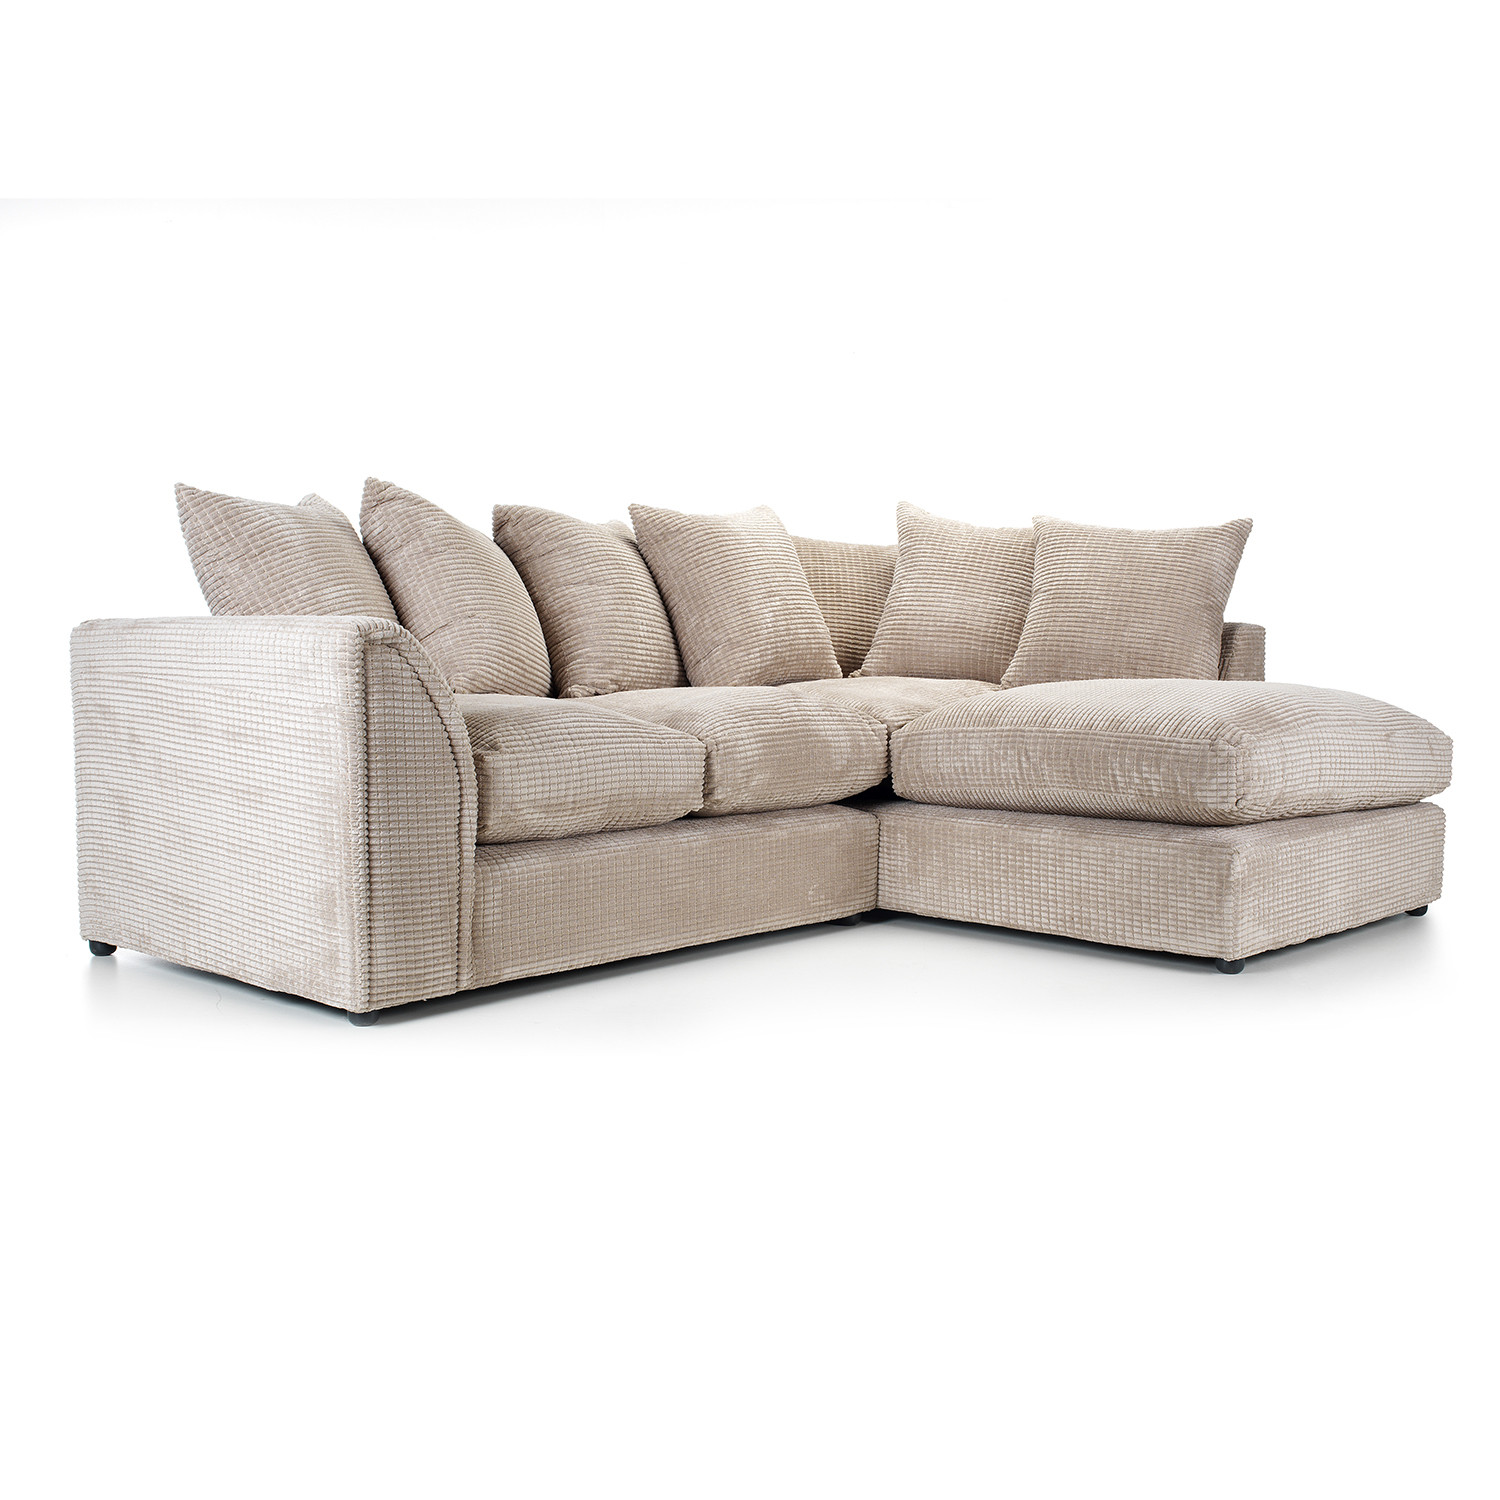 Cord Sofa
 Dylan Jumbo Cord Corner Sofa – Next Day Delivery Dylan